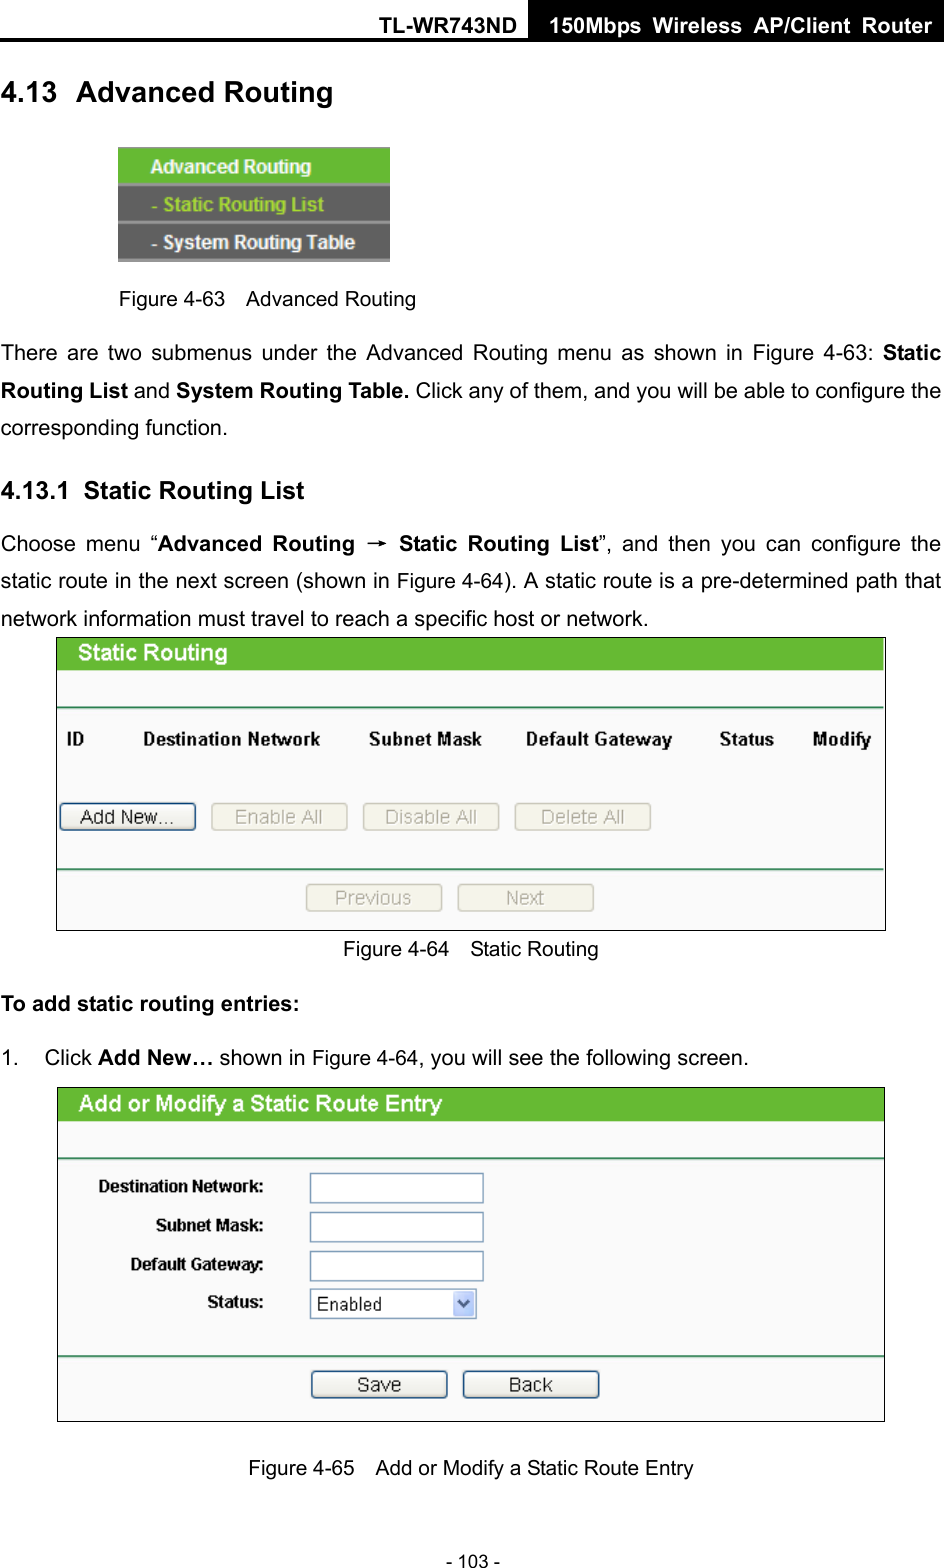 TL-WR743ND 150Mbps Wireless AP/Client Router - 103 - 4.13  Advanced Routing  Figure 4-63  Advanced Routing There are two submenus under the Advanced Routing menu as shown in Figure 4-63:  Static Routing List and System Routing Table. Click any of them, and you will be able to configure the corresponding function. 4.13.1  Static Routing List Choose menu “Advanced Routing → Static Routing List”, and then you can configure the static route in the next screen (shown in Figure 4-64). A static route is a pre-determined path that network information must travel to reach a specific host or network.  Figure 4-64  Static Routing To add static routing entries: 1. Click Add New… shown in Figure 4-64, you will see the following screen.  Figure 4-65    Add or Modify a Static Route Entry 